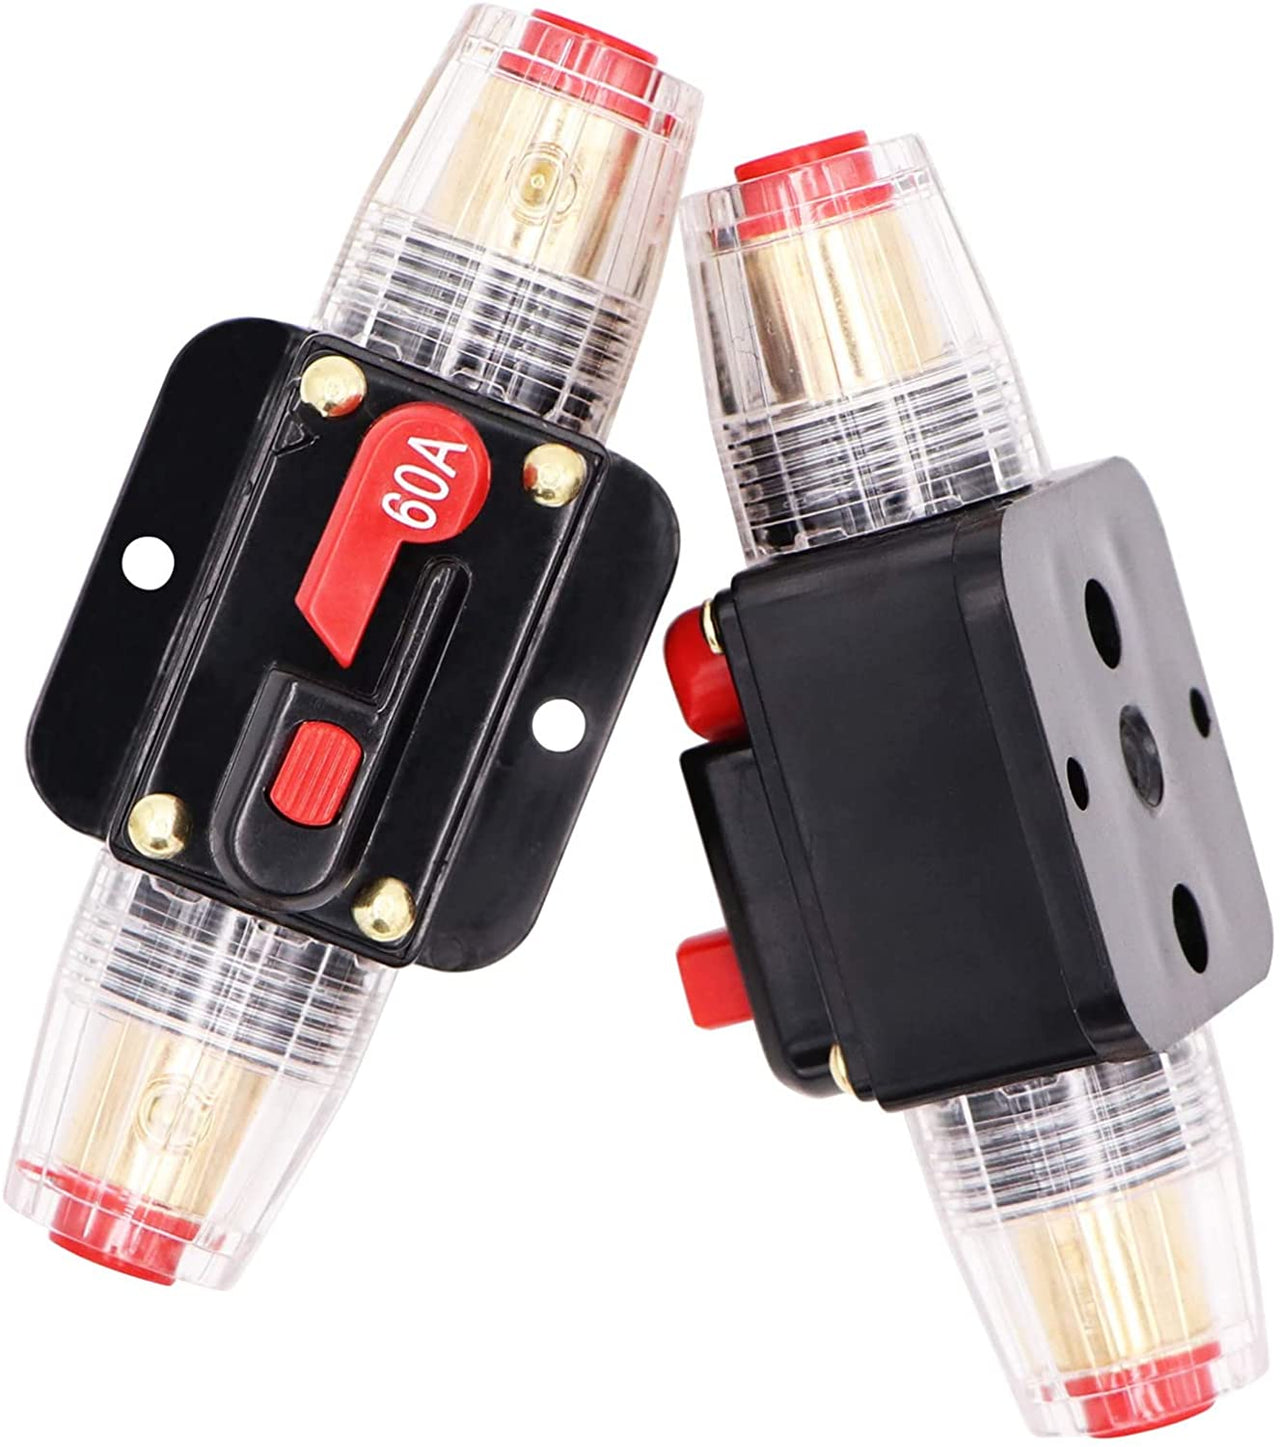 Absolute ICB60 4/8 AWG 60 Amp in-line Circuit Breaker with Manual Reset with Manual Reset Car Auto Marine Boat Stereo